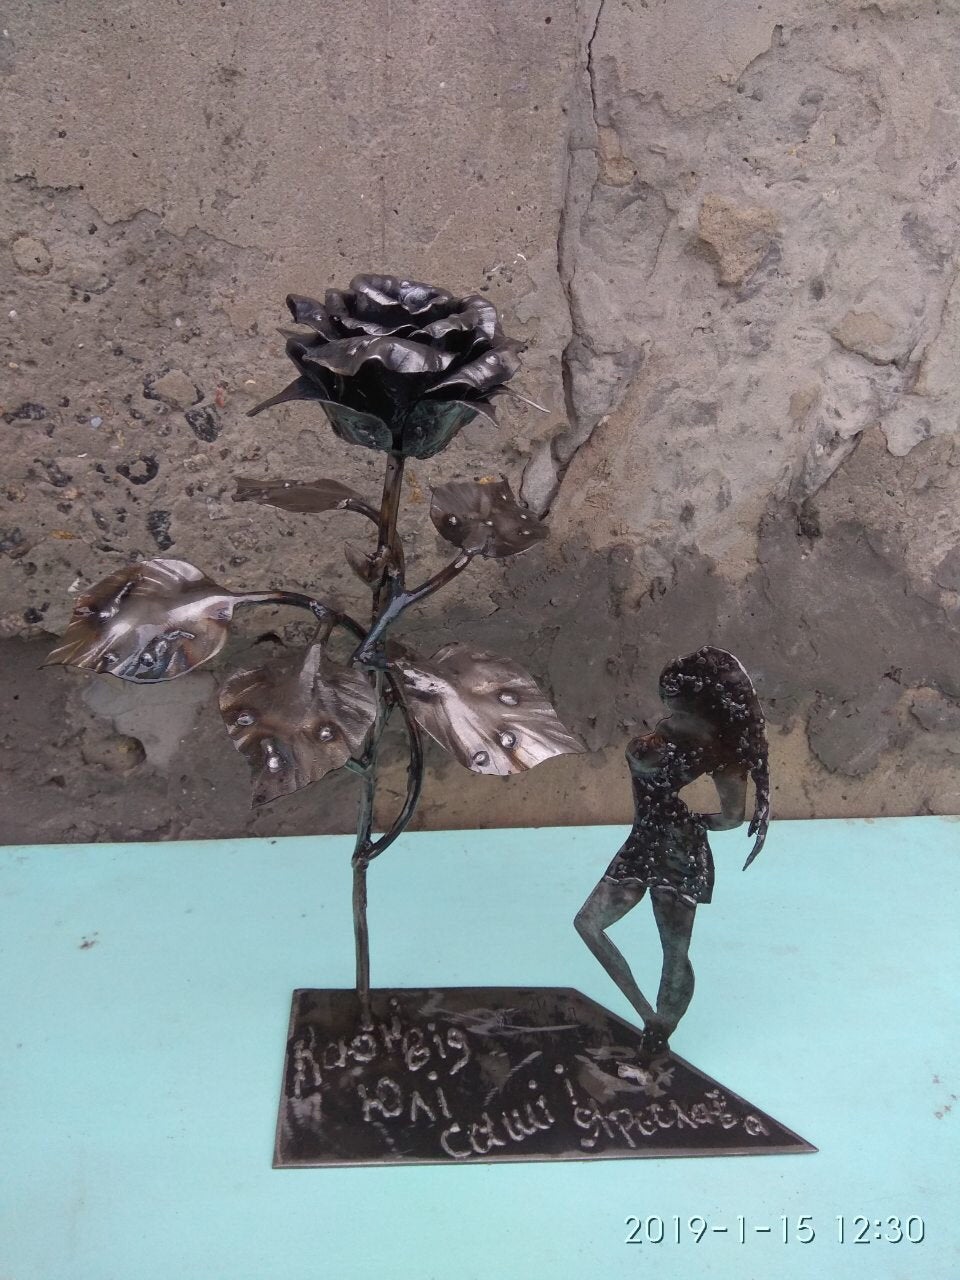 Iron rose, steel rose, metal rose, rose, iron gift, iron anniversary gift, metal sculpture, calla, daisy,rose for her,her birthday gift,lily